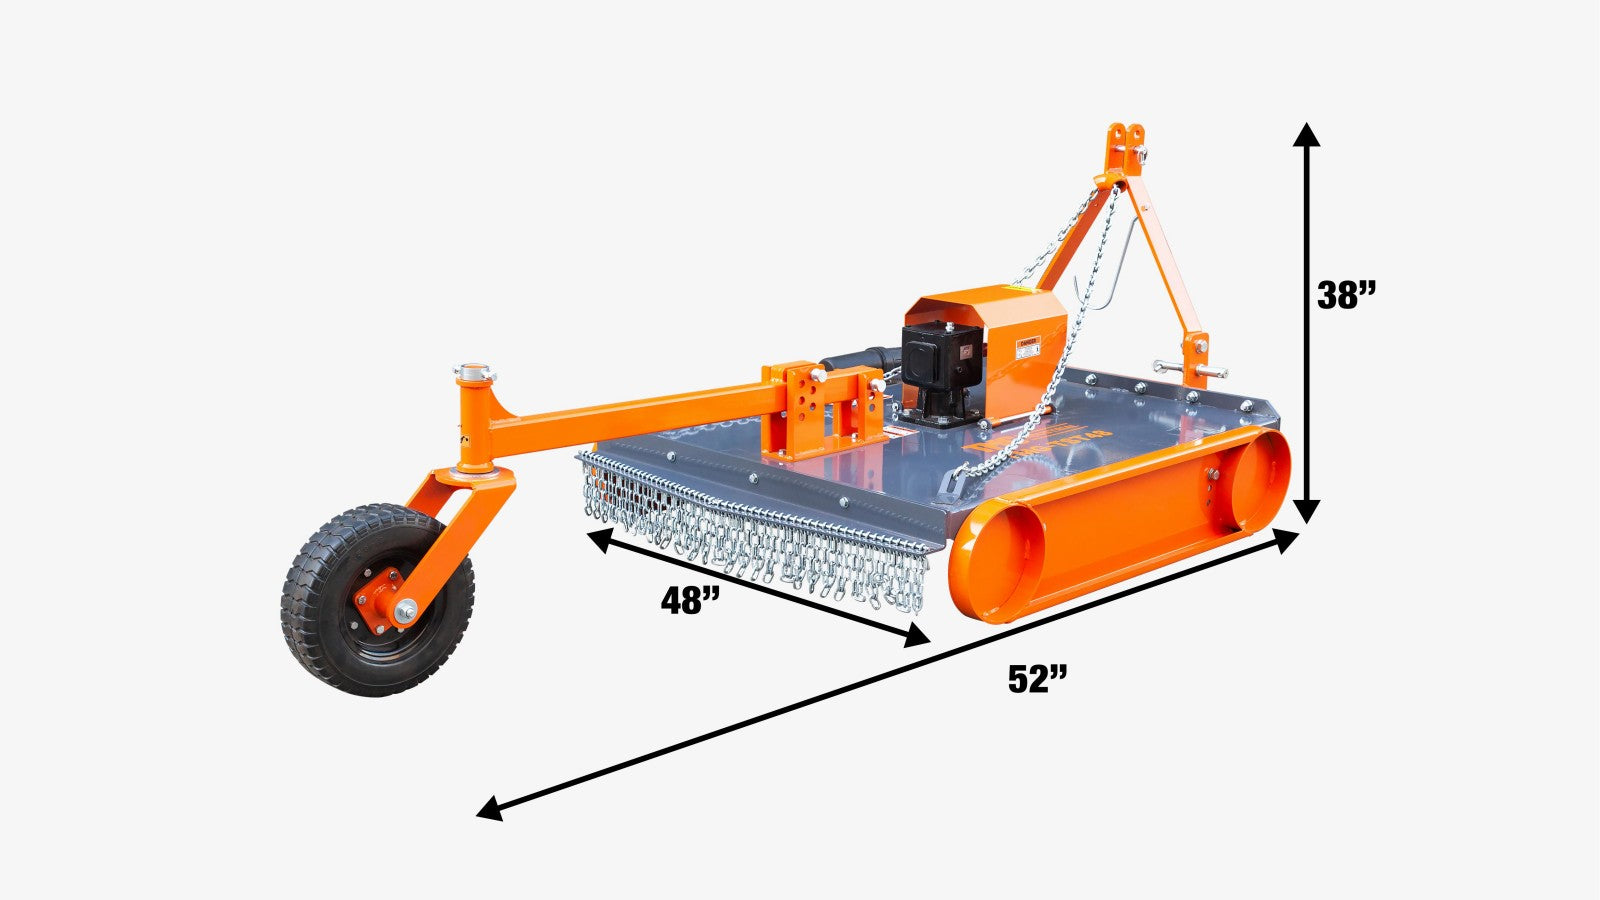 TMG Industrial 48” 3-Point Hitch Slasher Topper Mower, Category 1 & 2, PTO shaft included, TMG-TST48-specifications-image